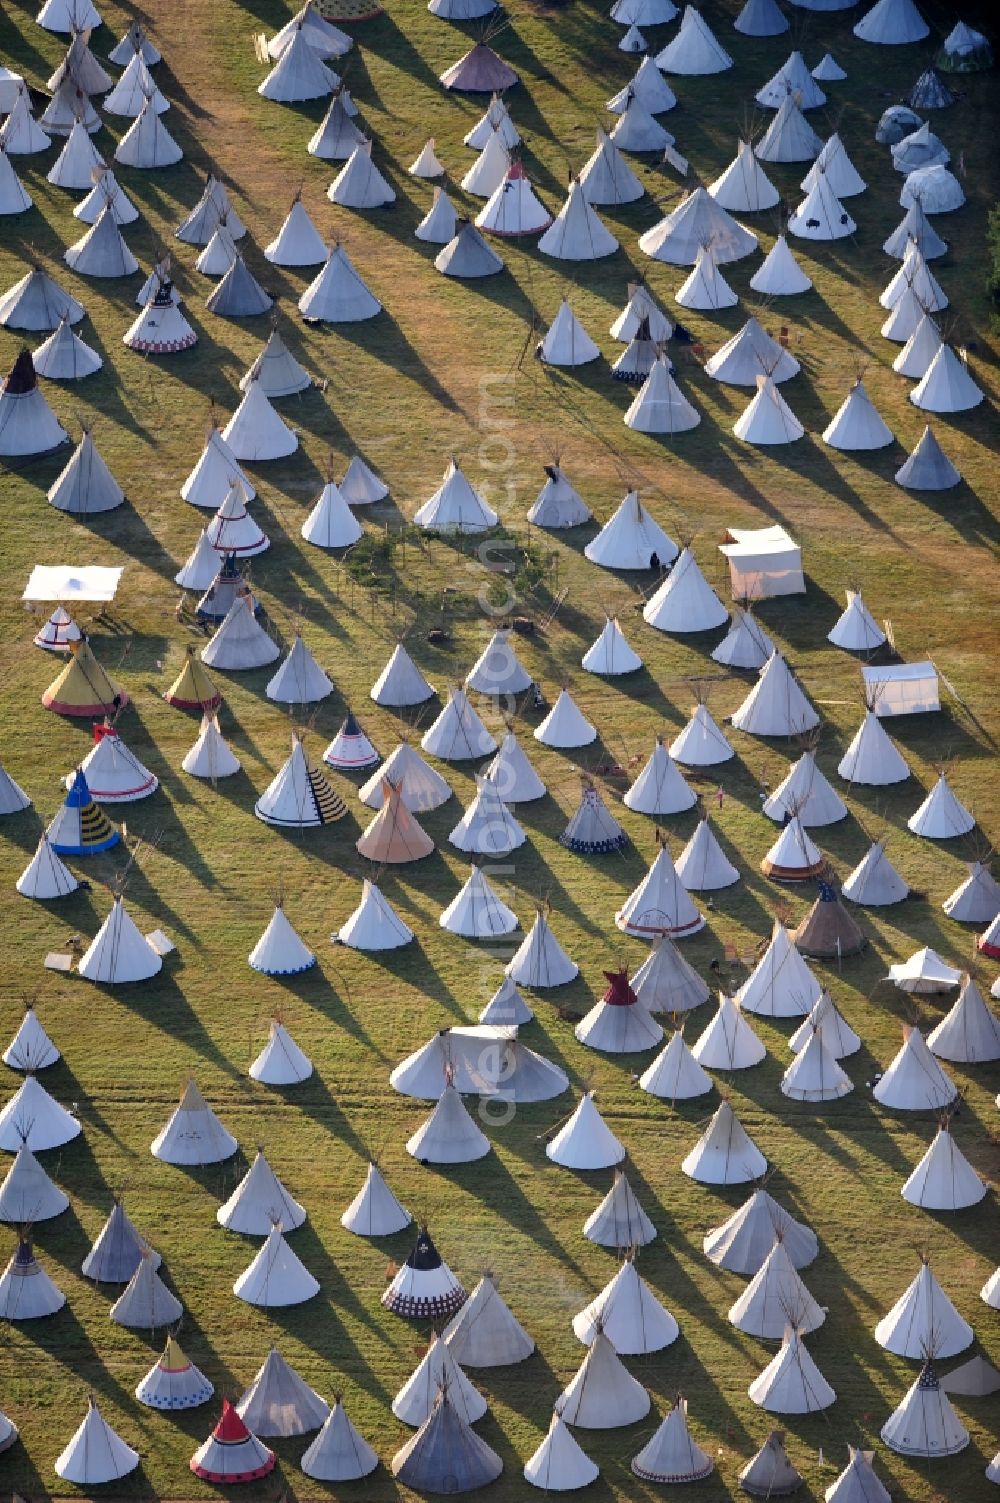 Seddiner See from above - View of a tent camp in the district Kähnsdorf of the municipality Seddiner See in Brandenburg. The Indians meeting the Week found by the German Indianistikbund took place with about 1,000 Indians fans on a field. The participants ,who spent the nights in tipis, presented adjusted the lives of the Indians for ten days